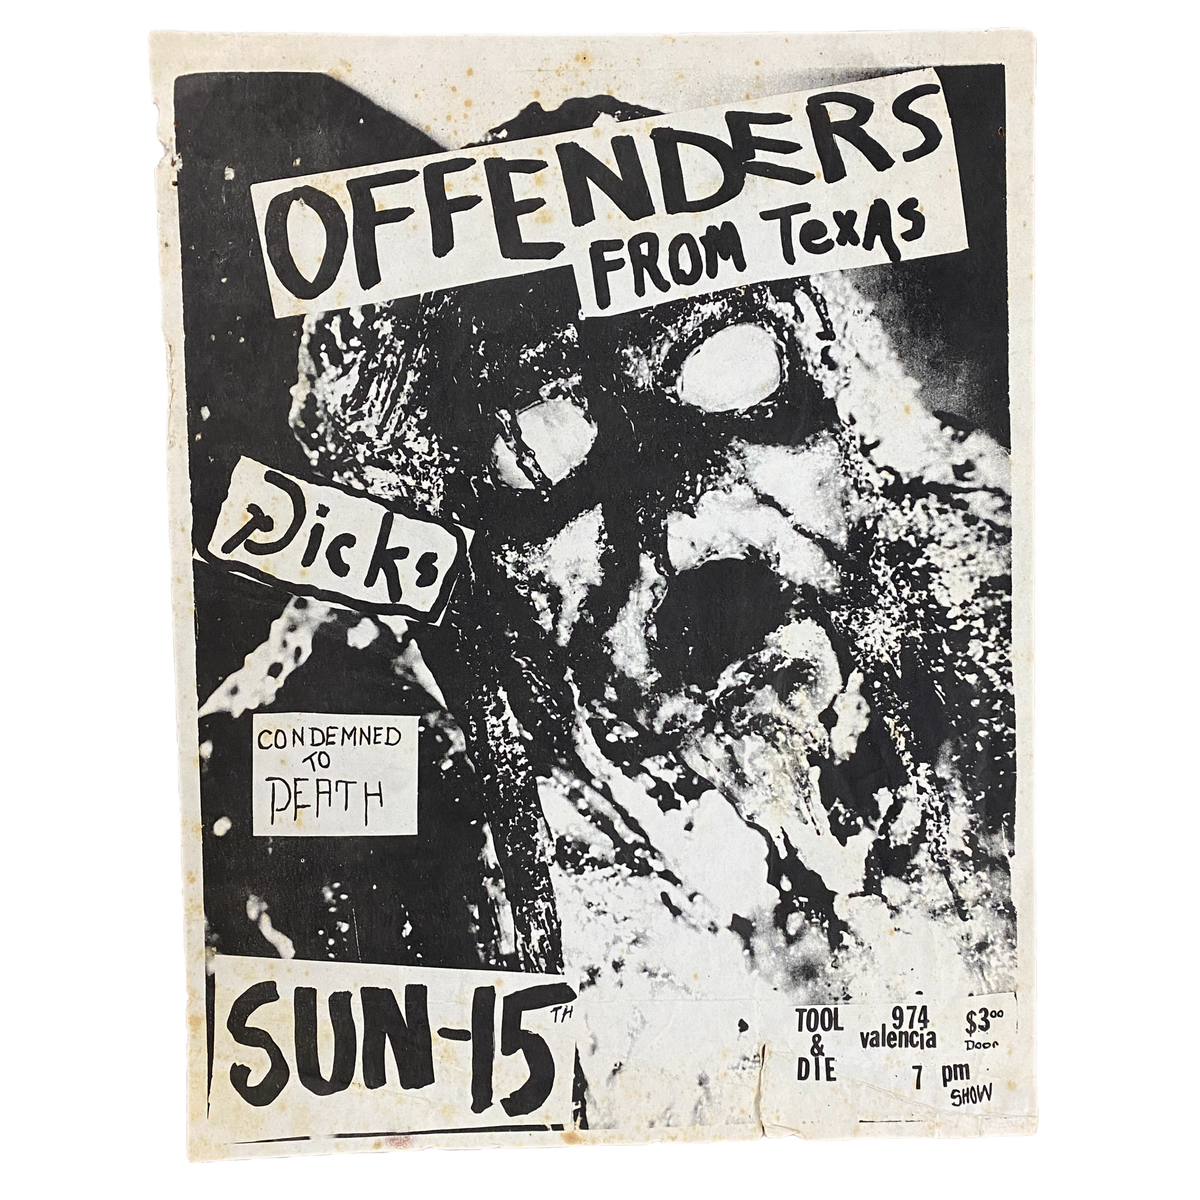 Vintage Offenders &quot;Tool &amp; Die&quot; Dicks Condemned To Death Flyer